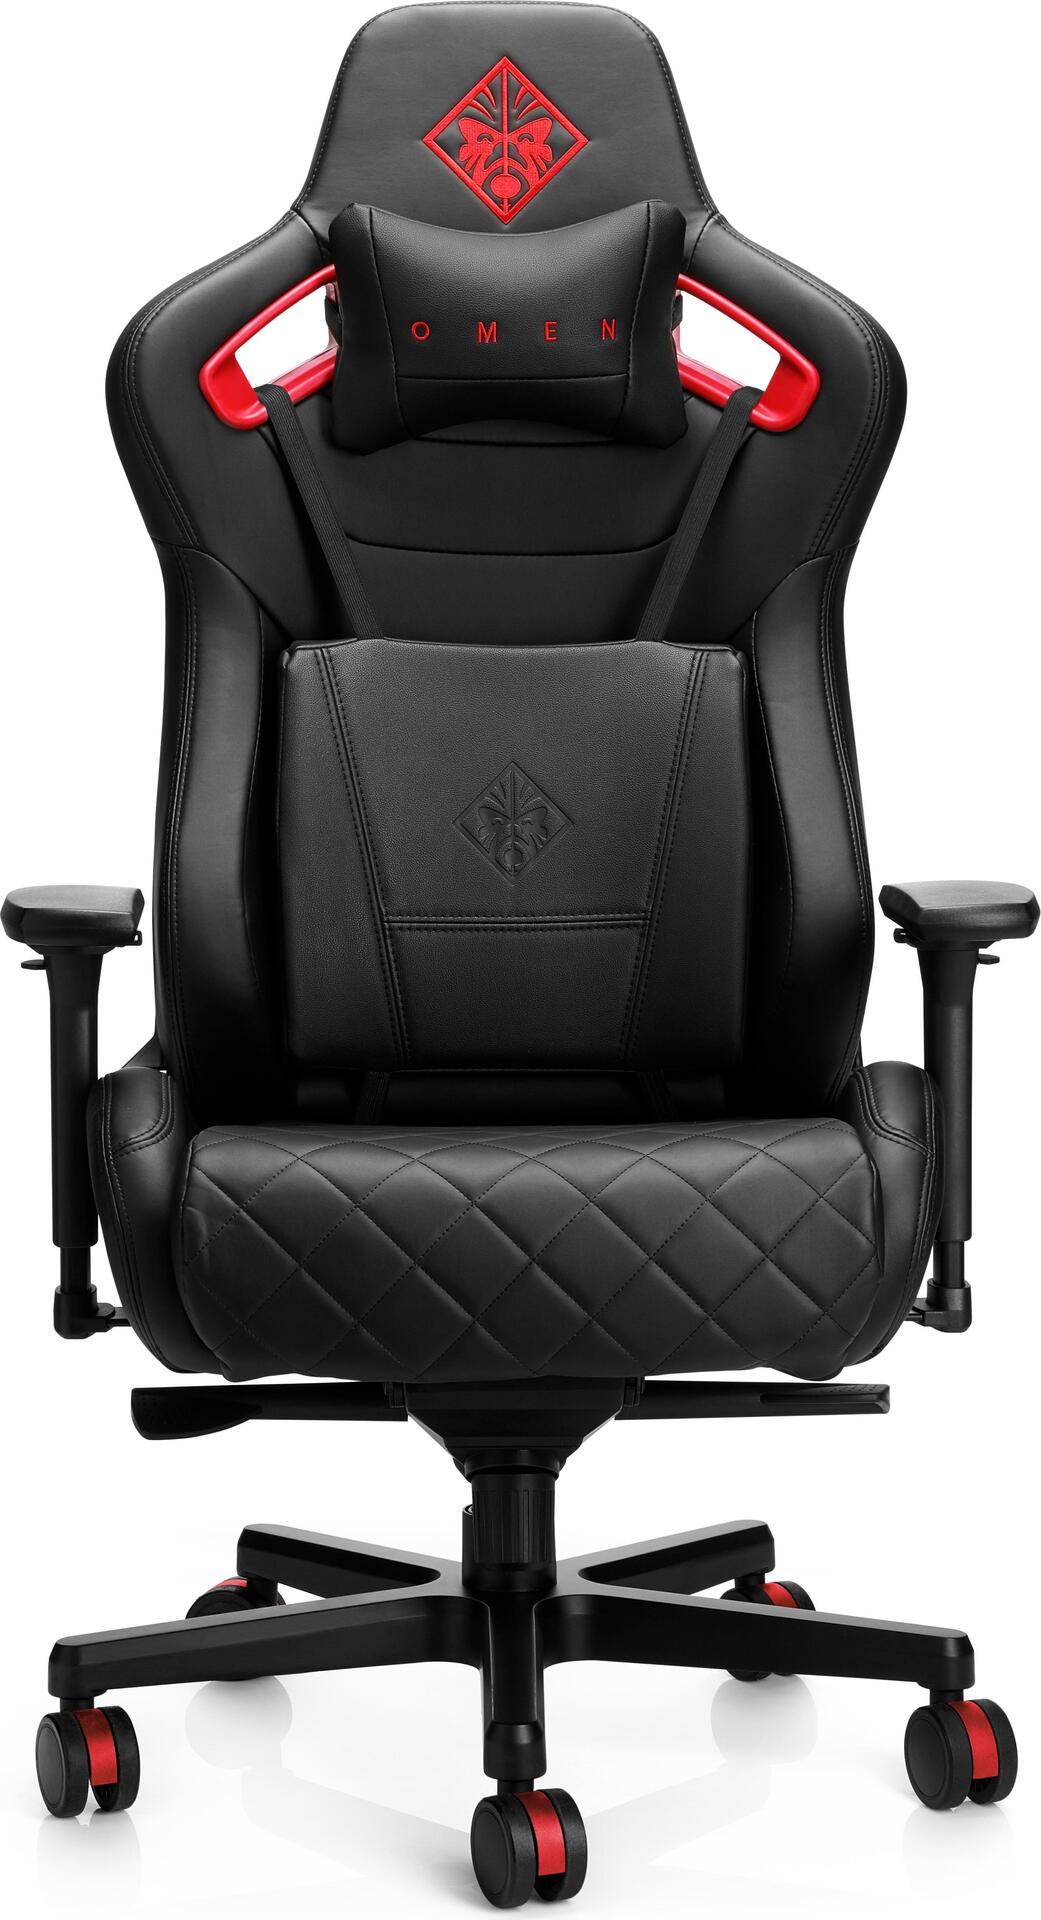 HP OMEN by Citadel Gaming Chair (6KY97AA)